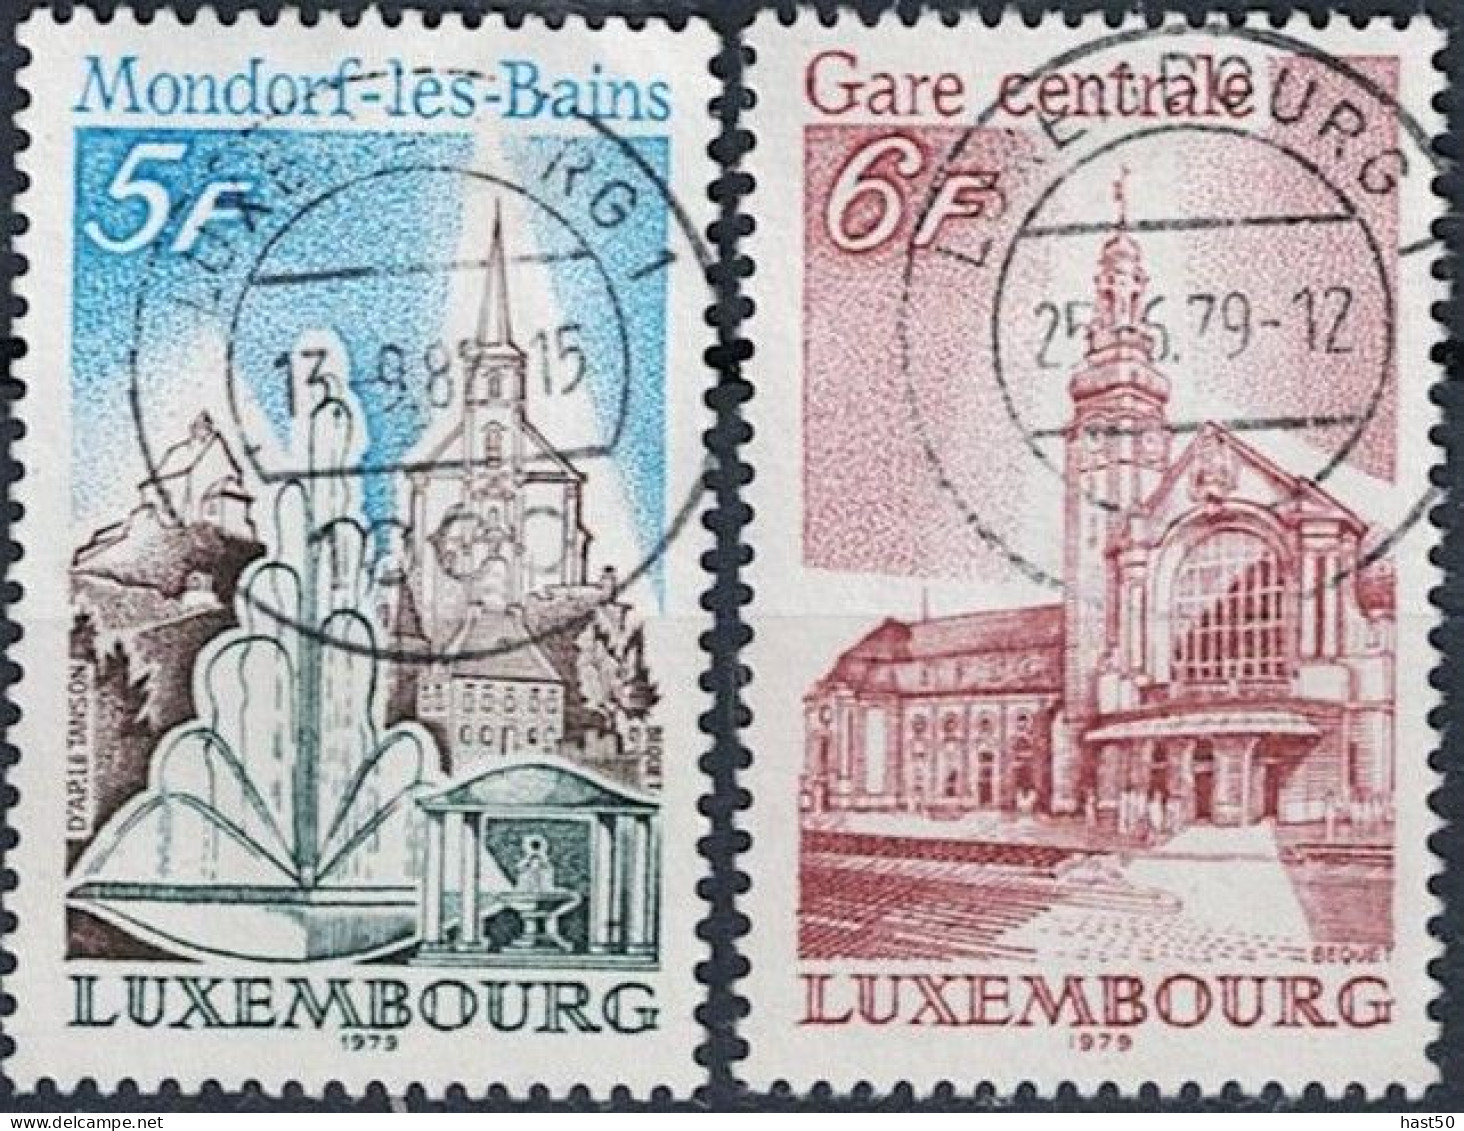 Luxemburg - Sehenswürdigkeiten (MiNr: 985/6) 1979 - Gest Used Obl - Used Stamps